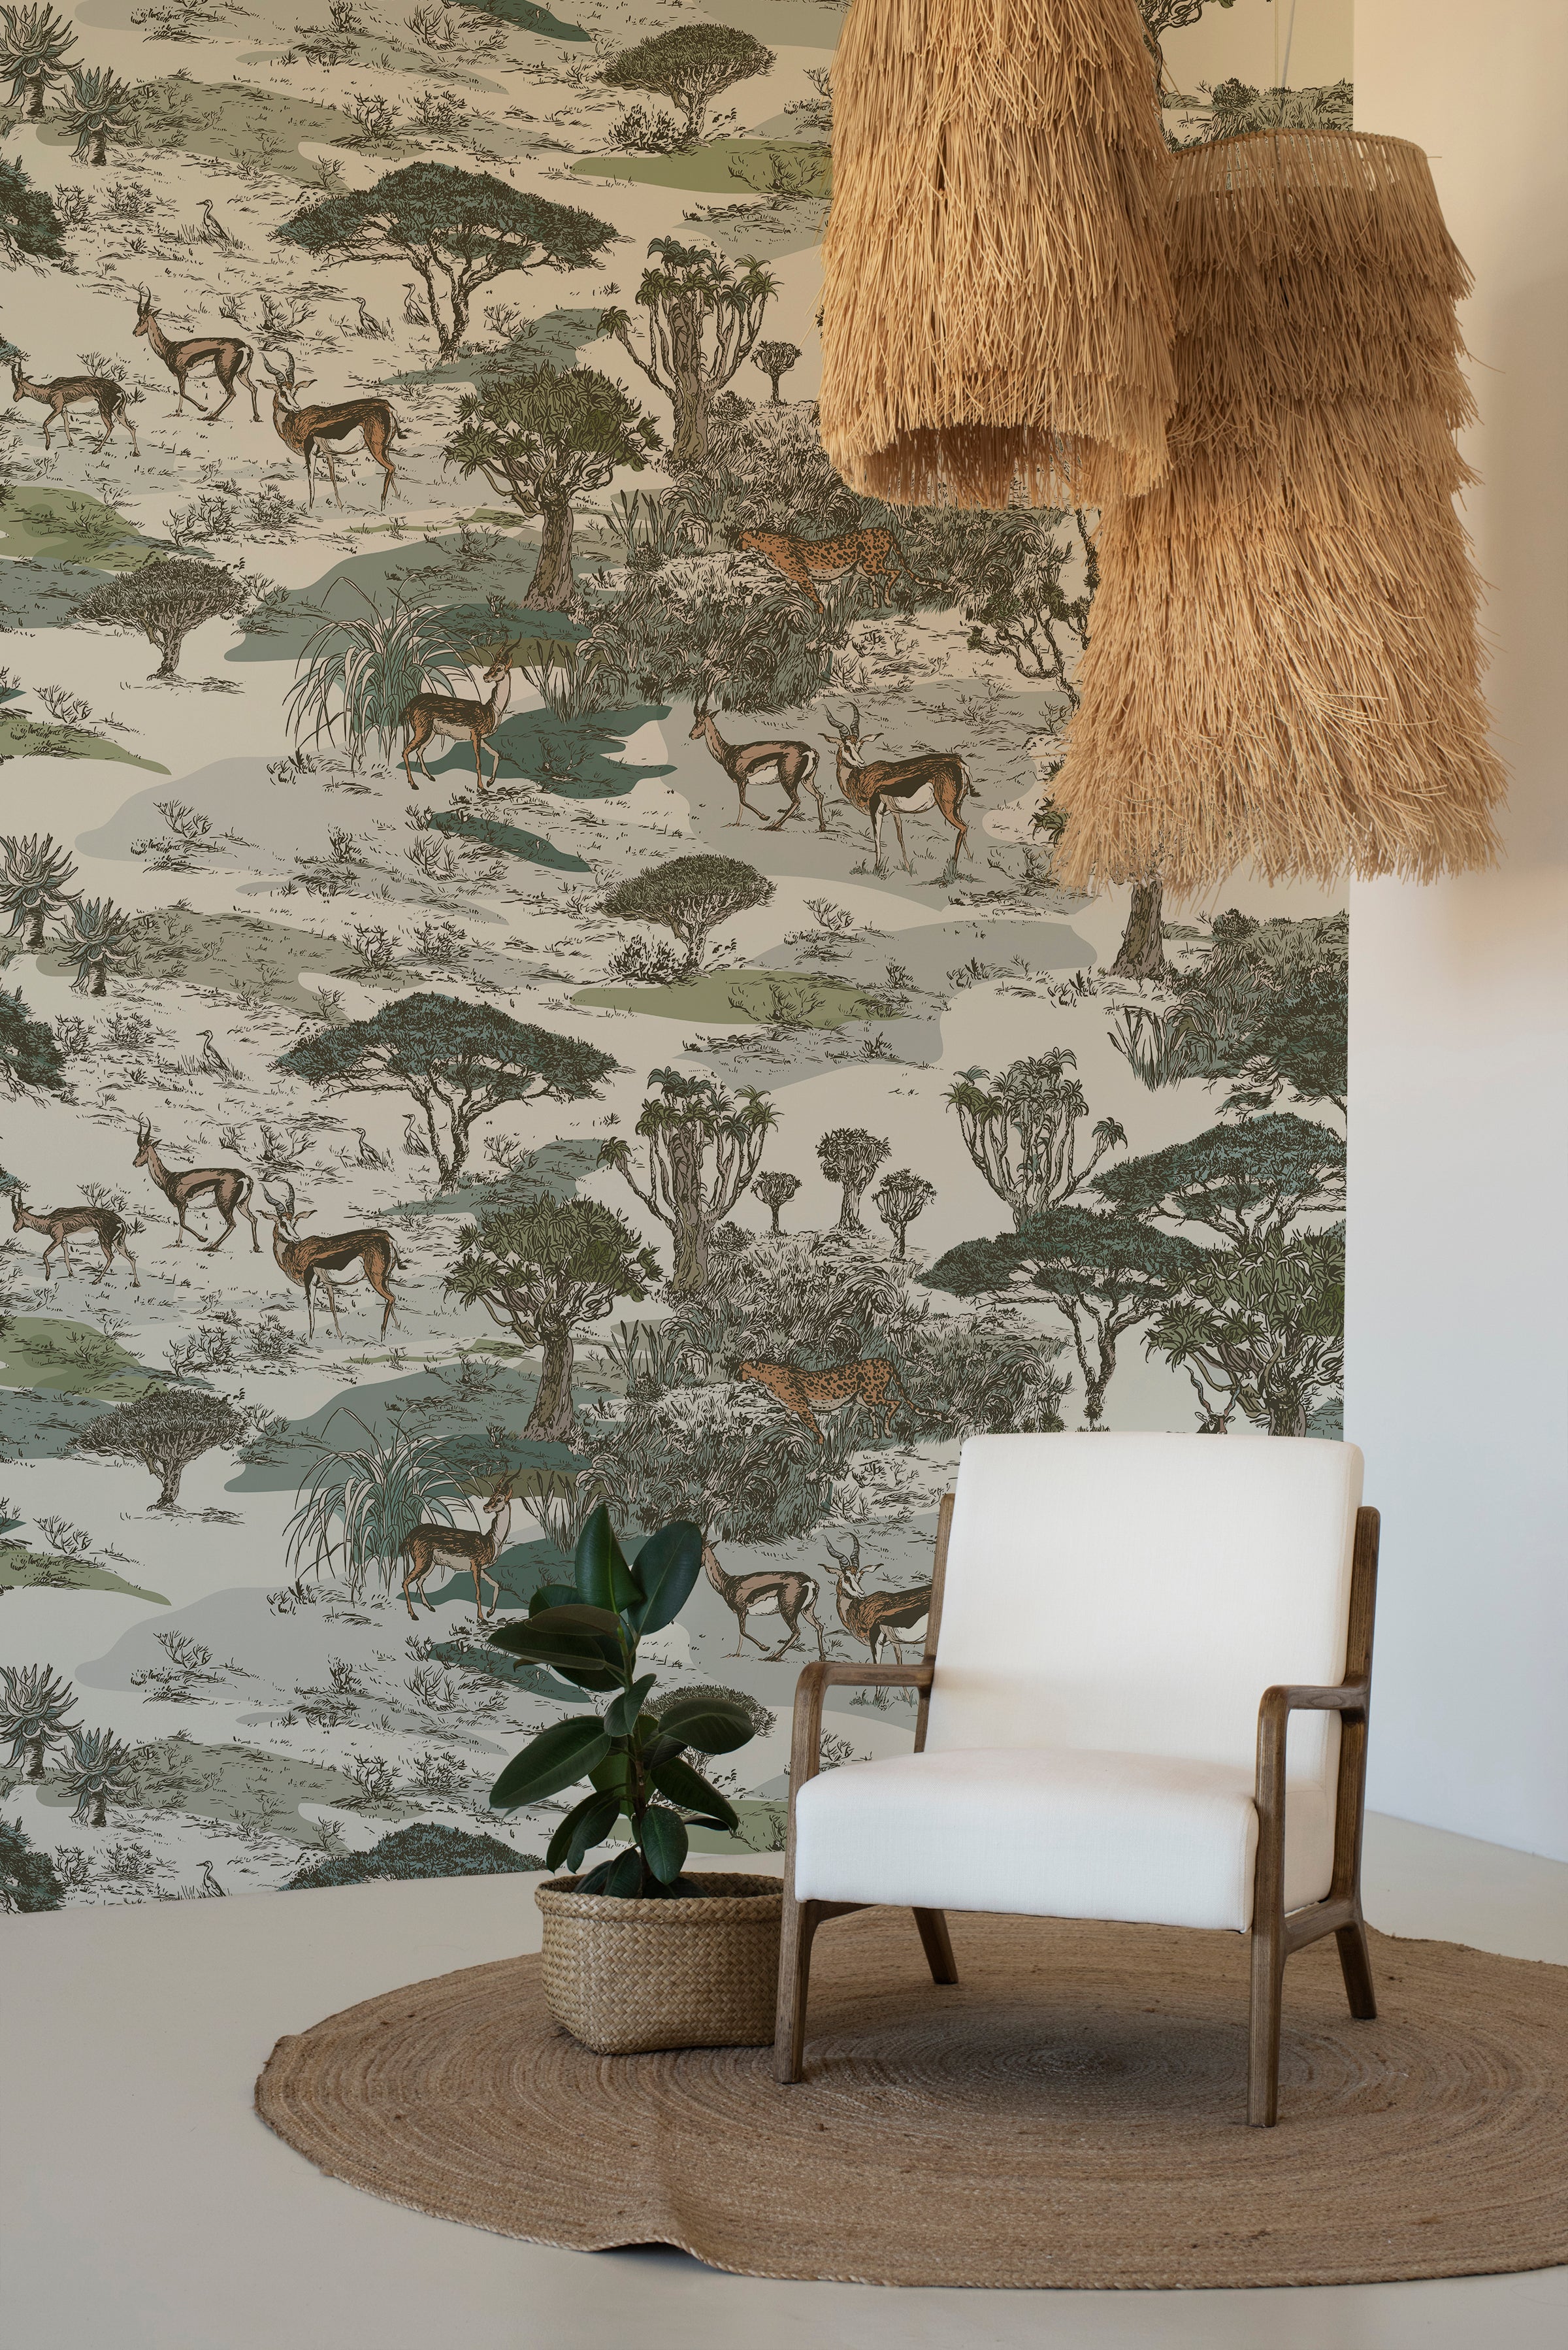 A cozy corner with a modern white armchair and a natural jute round rug on a wooden floor. An indoor potted plant sits beside the chair, and the room is illuminated by a large, tiered, fringe pendant light. The walls are covered with a safari-themed wallpaper mural depicting a savanna scene with impalas and a leopard amid a variety of trees